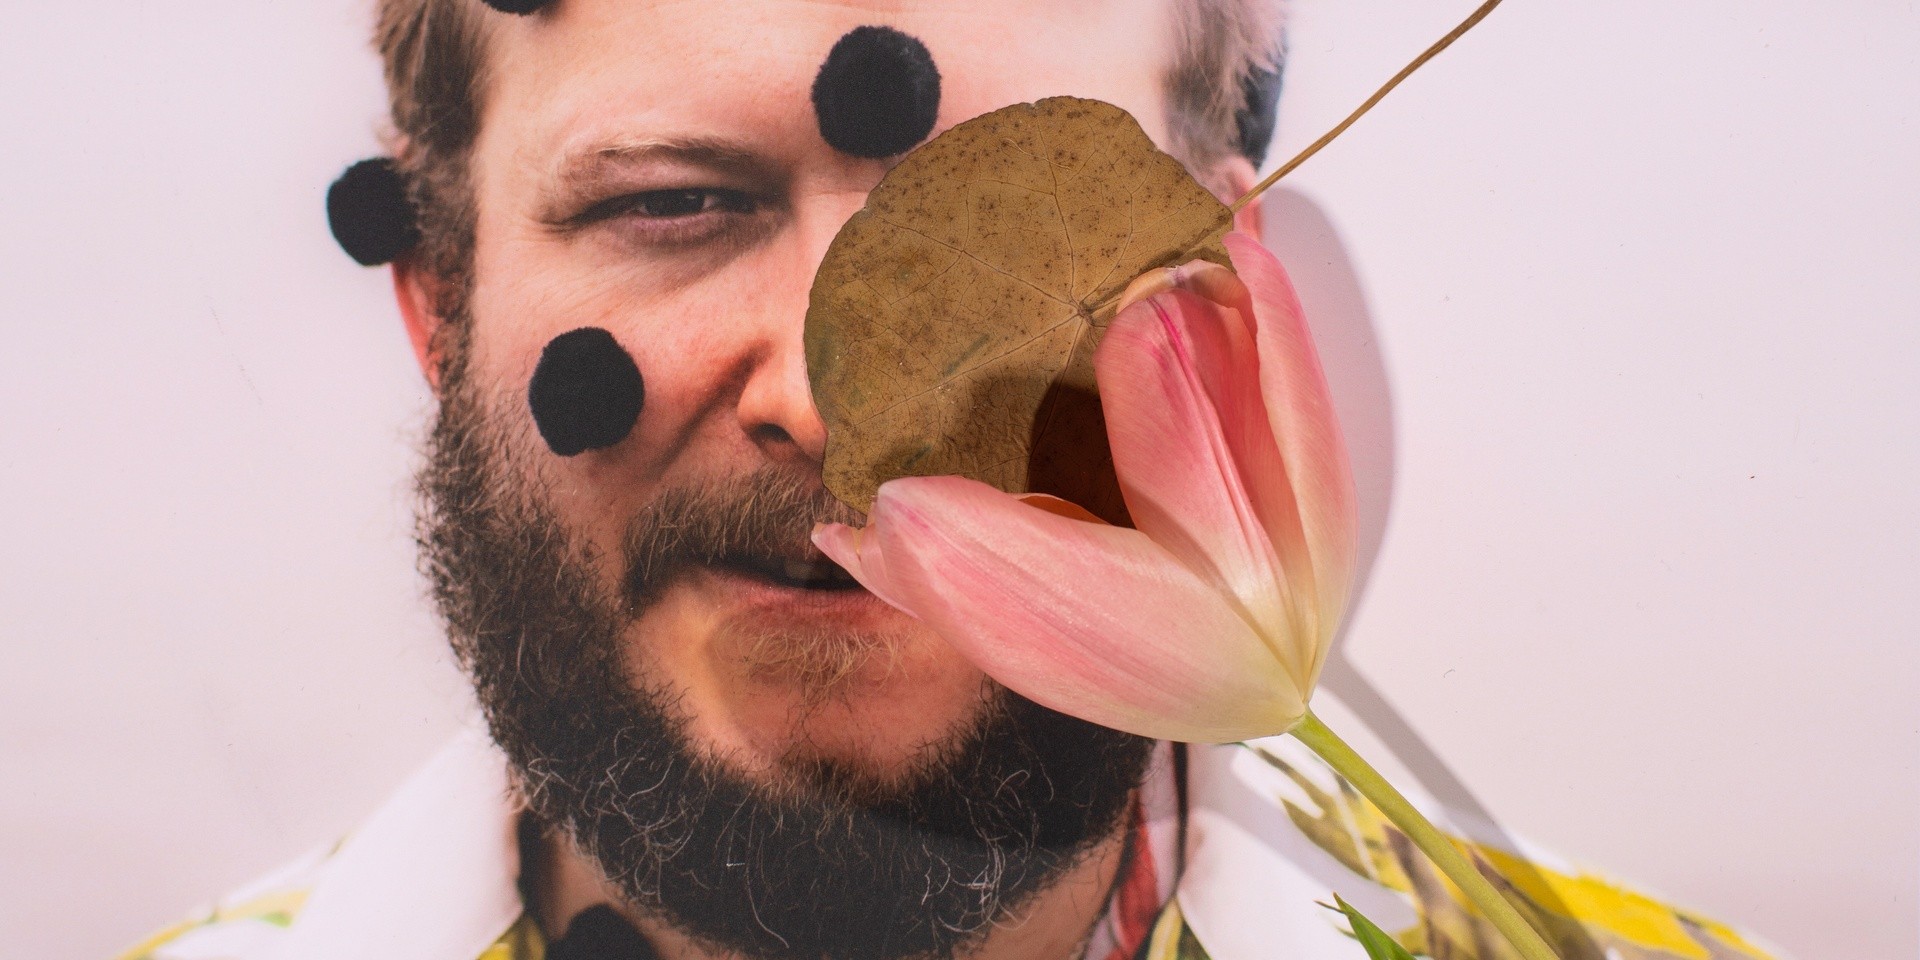 "We are the best we’ve ever been right now": An interview with Bon Iver